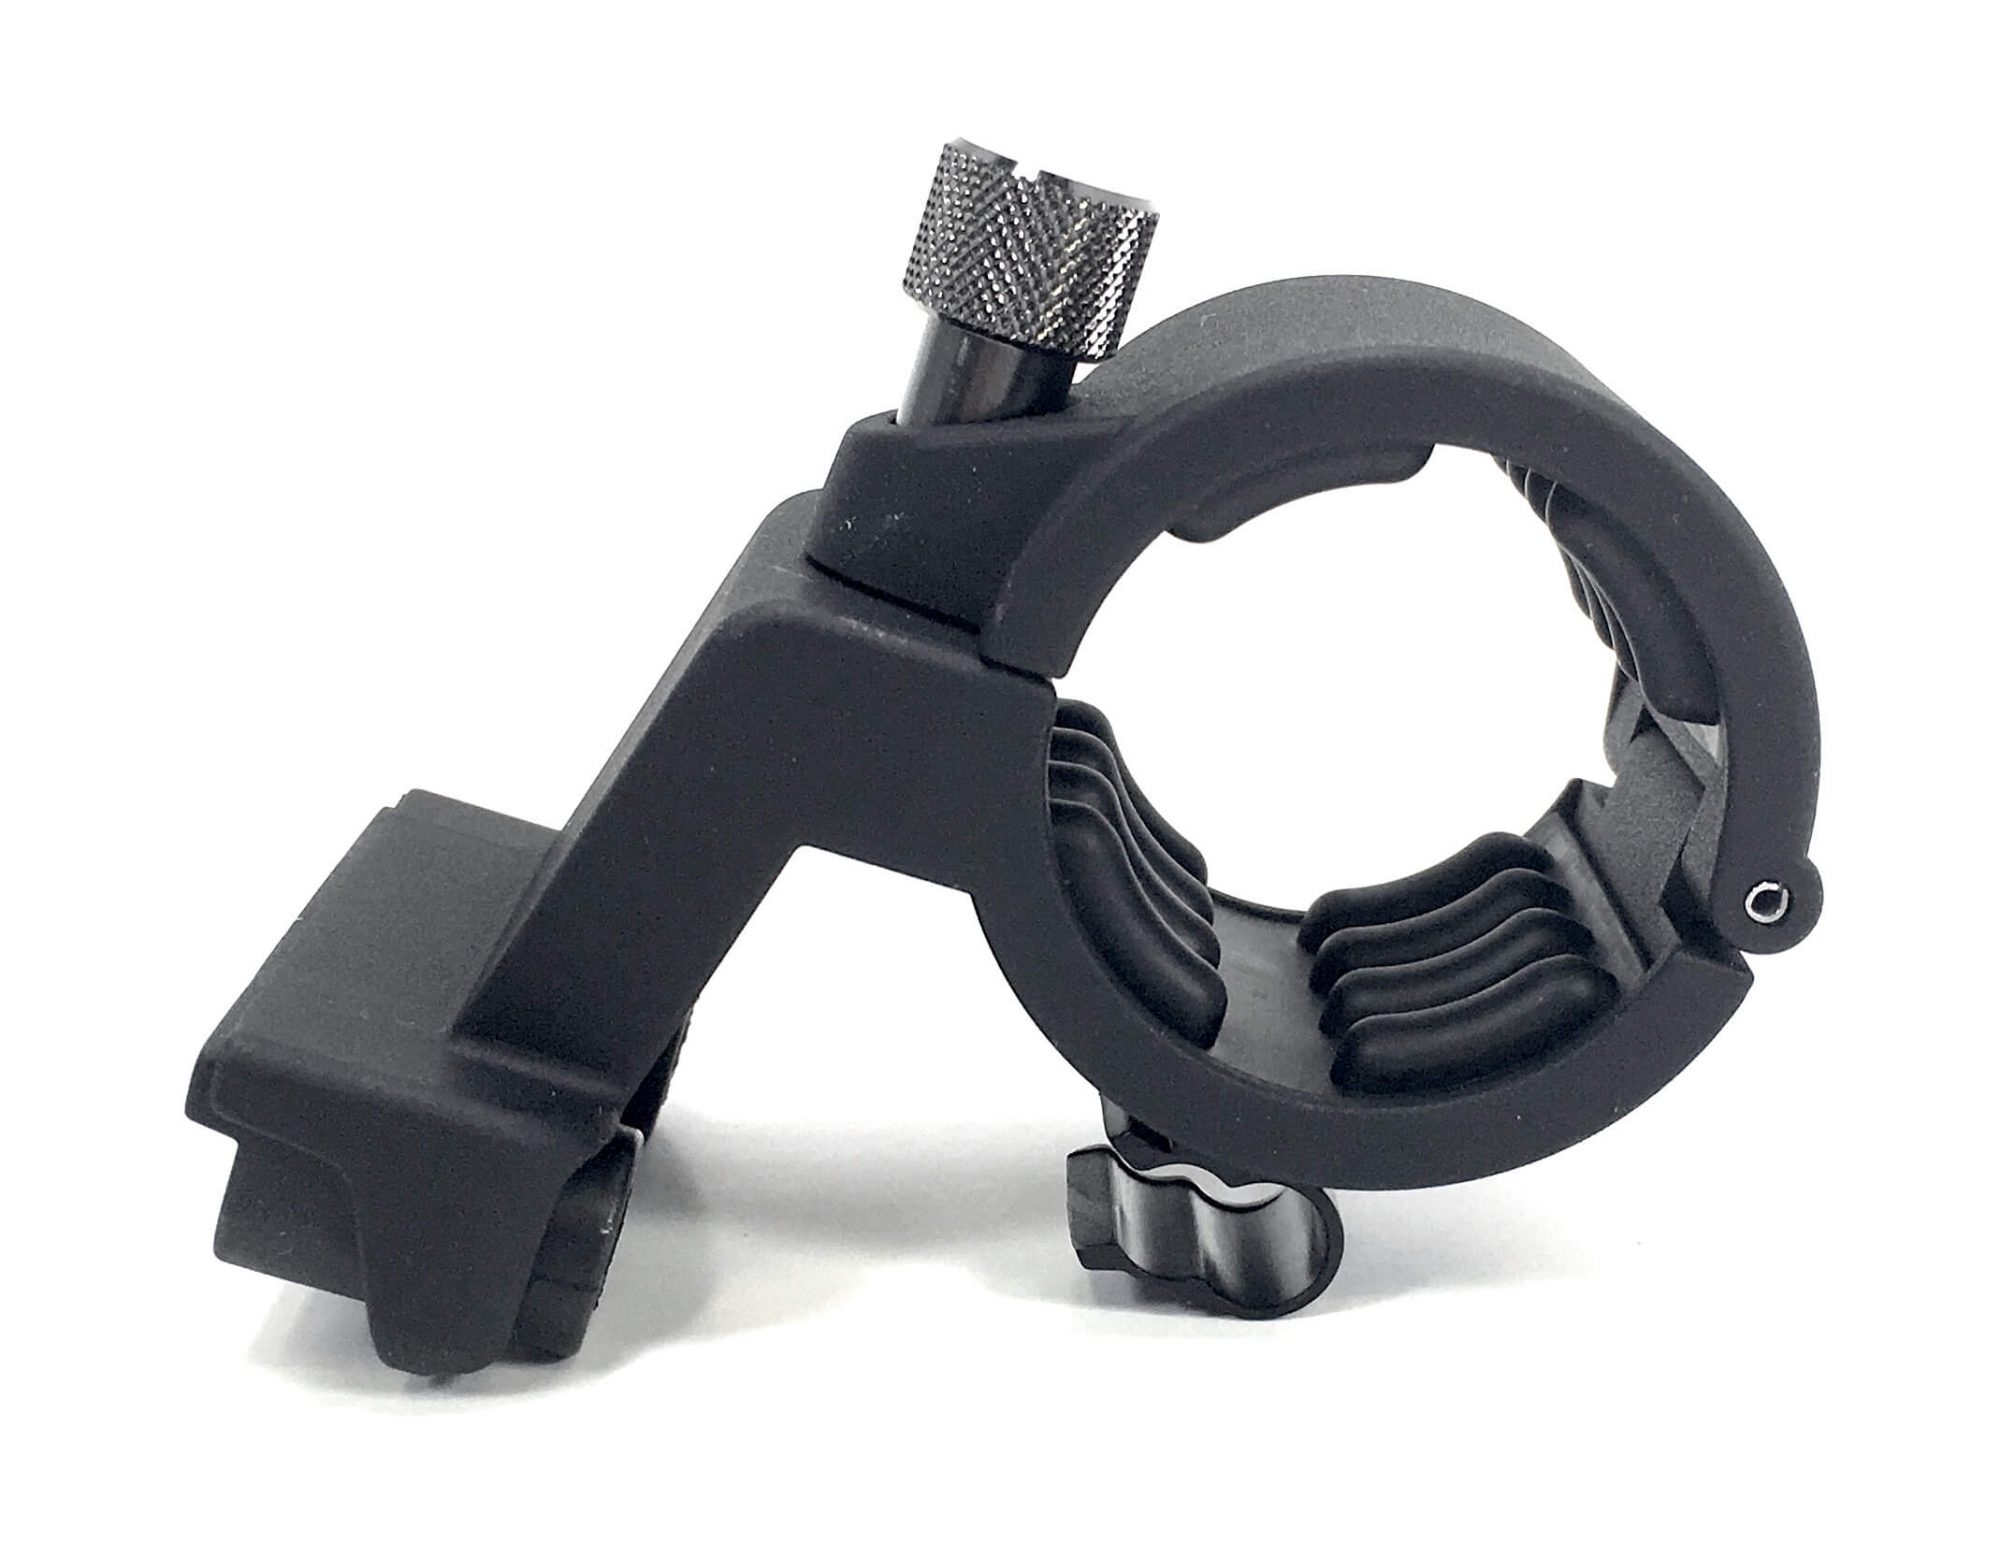 Original Microphone Holder for the Canon XA20 camcorder. It is a genuine Canon part, sourced directly from Canon USA. Brand new factory fresh. Free Shipping. Screws Sold Separately.